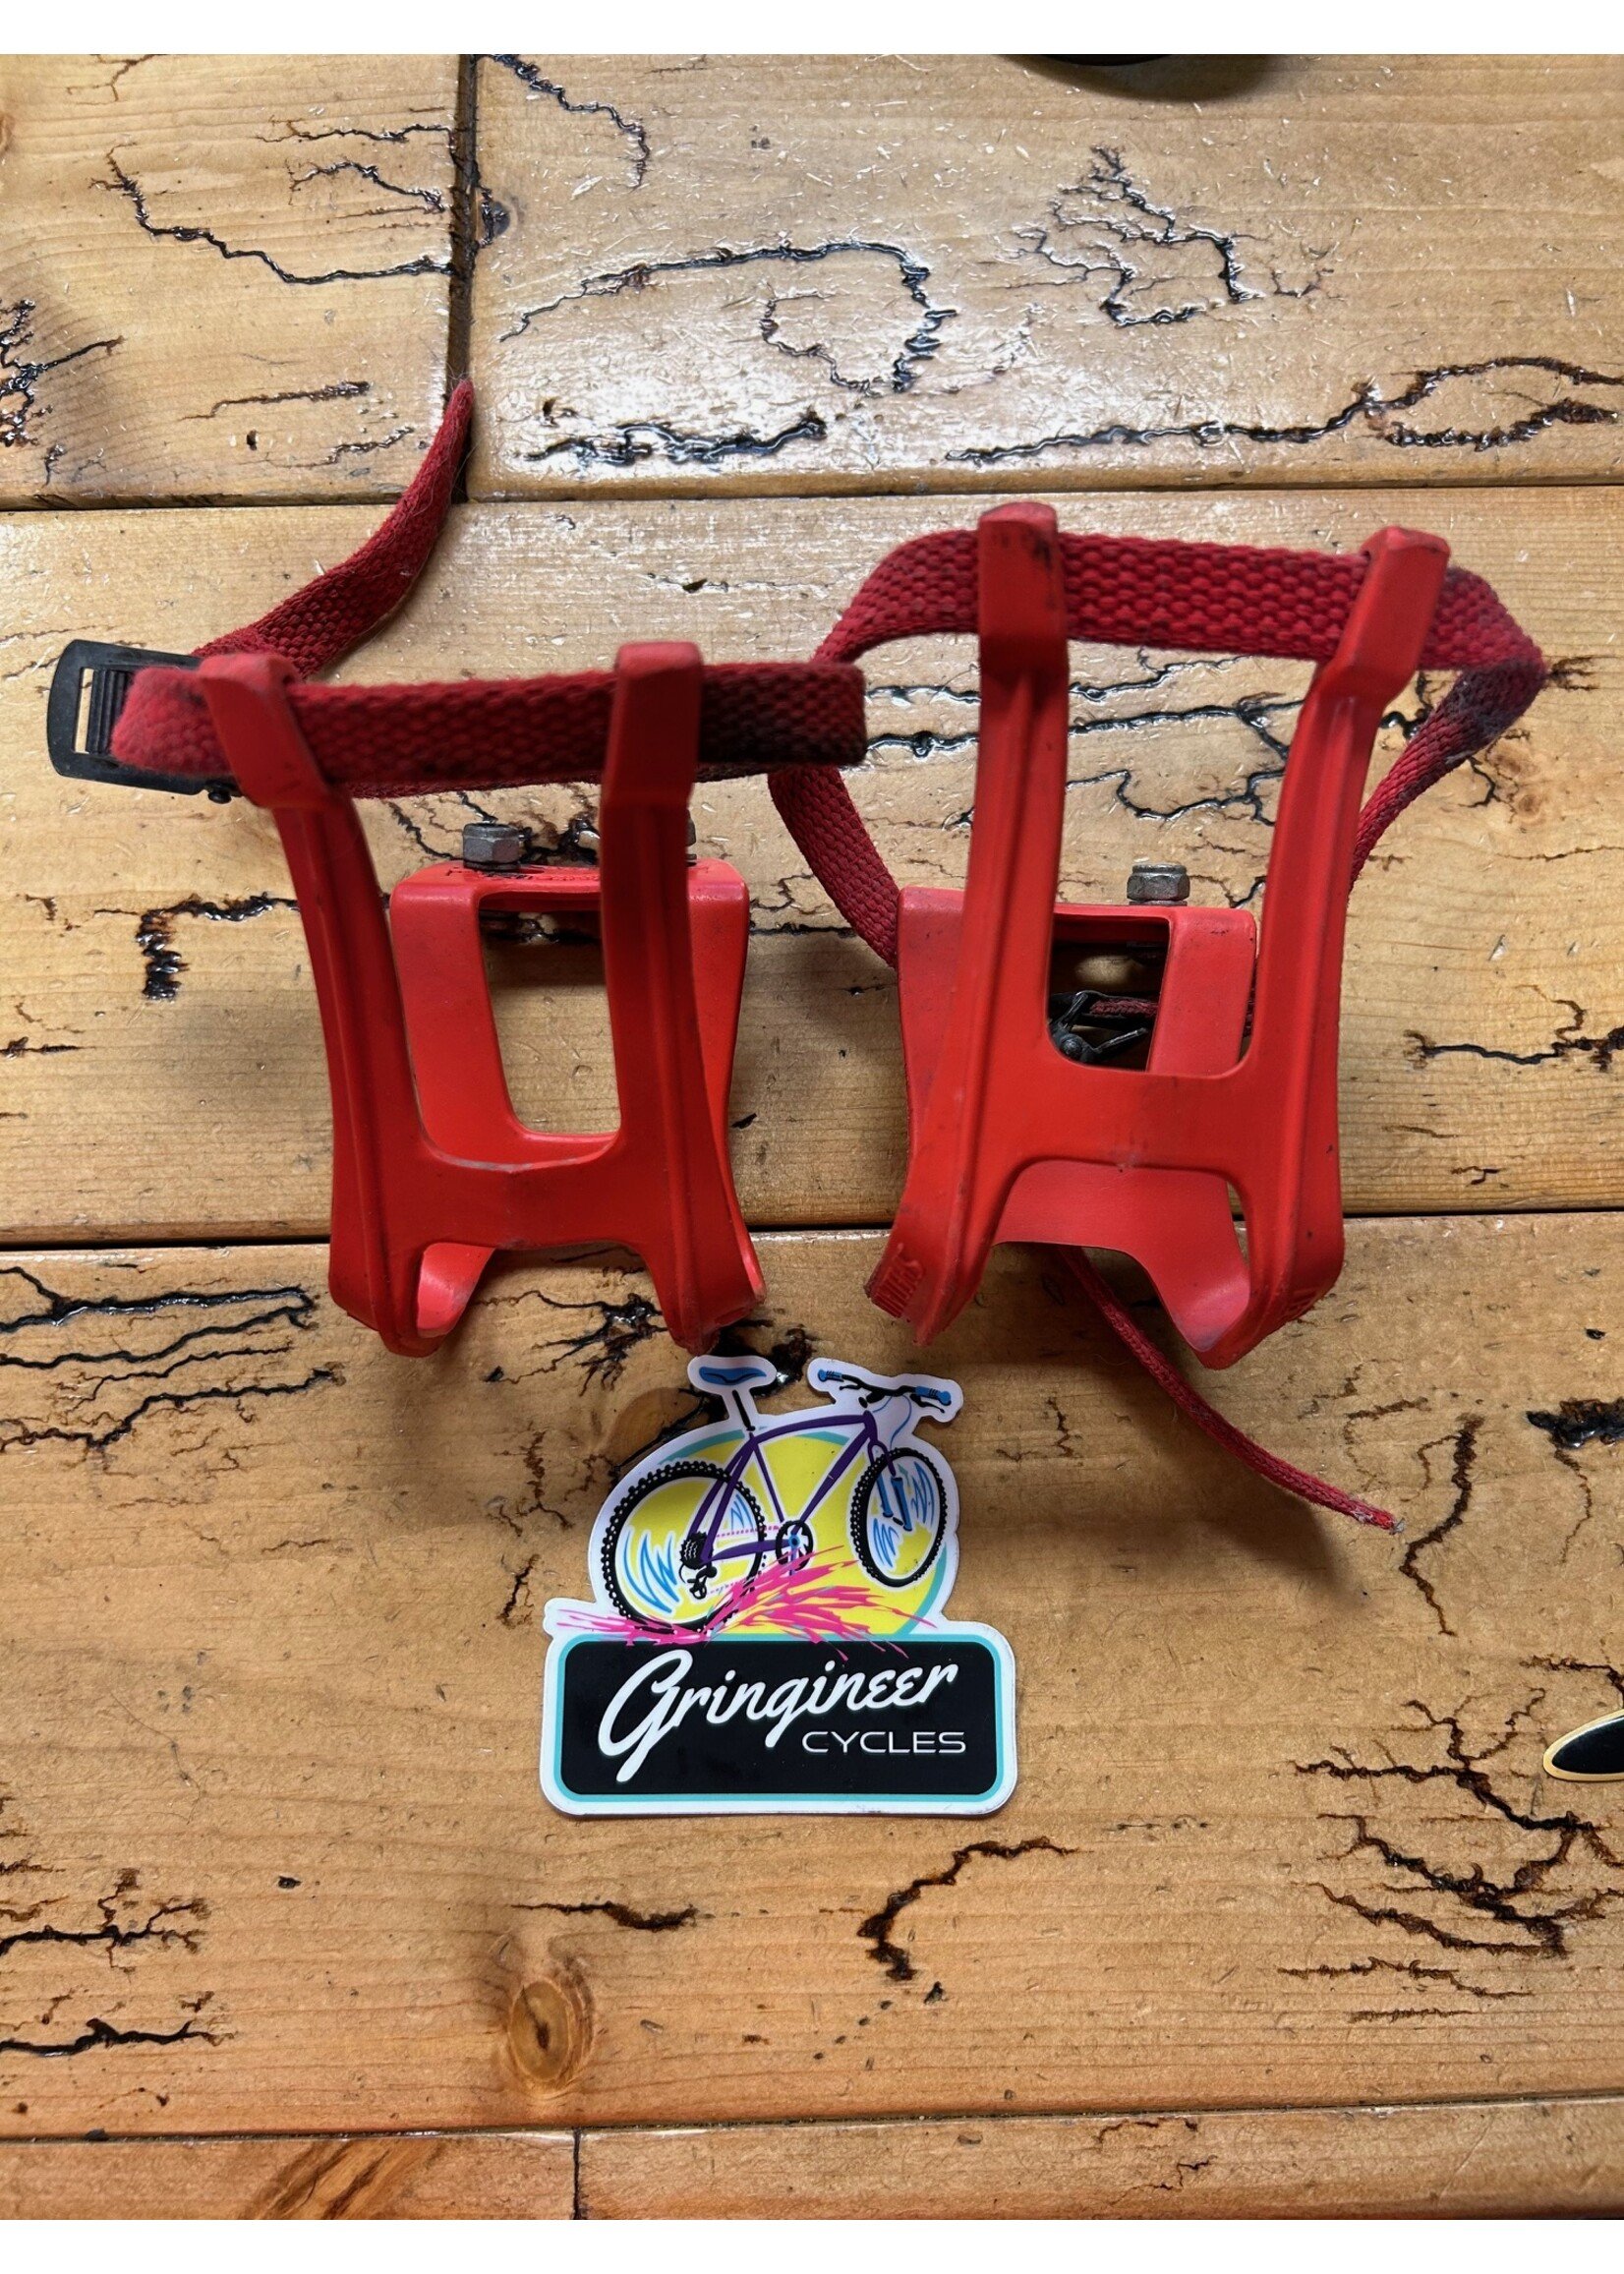 Specialized Specialized Large Red Plastic Toe Clips With Straps